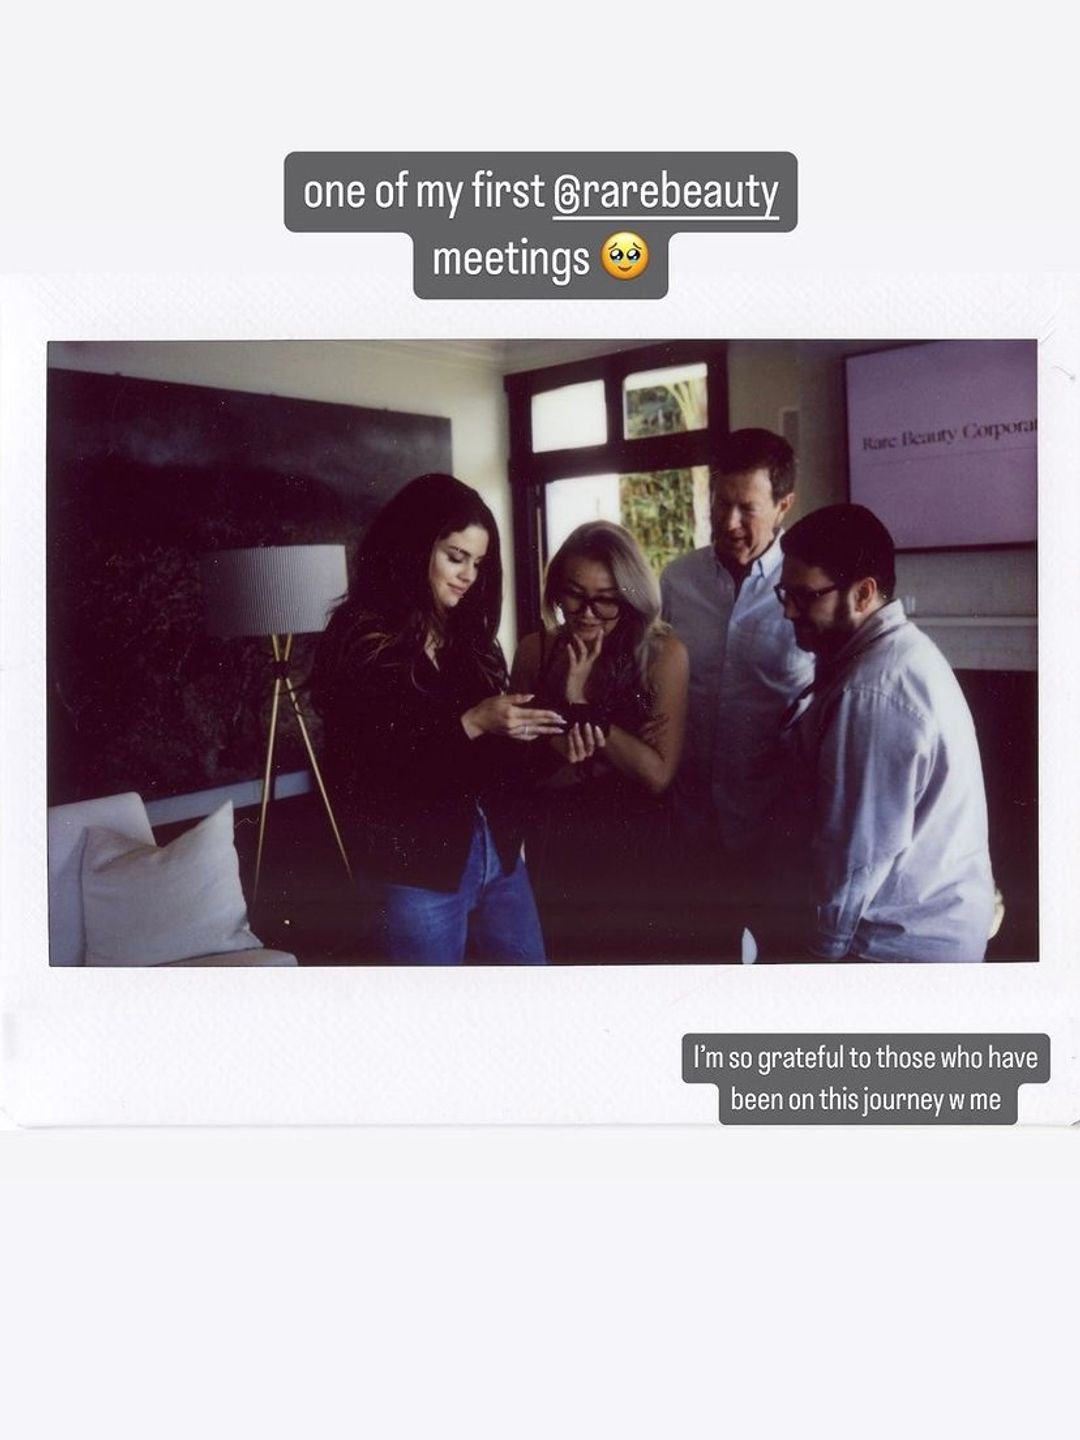 Selena with her team looking at a phone 